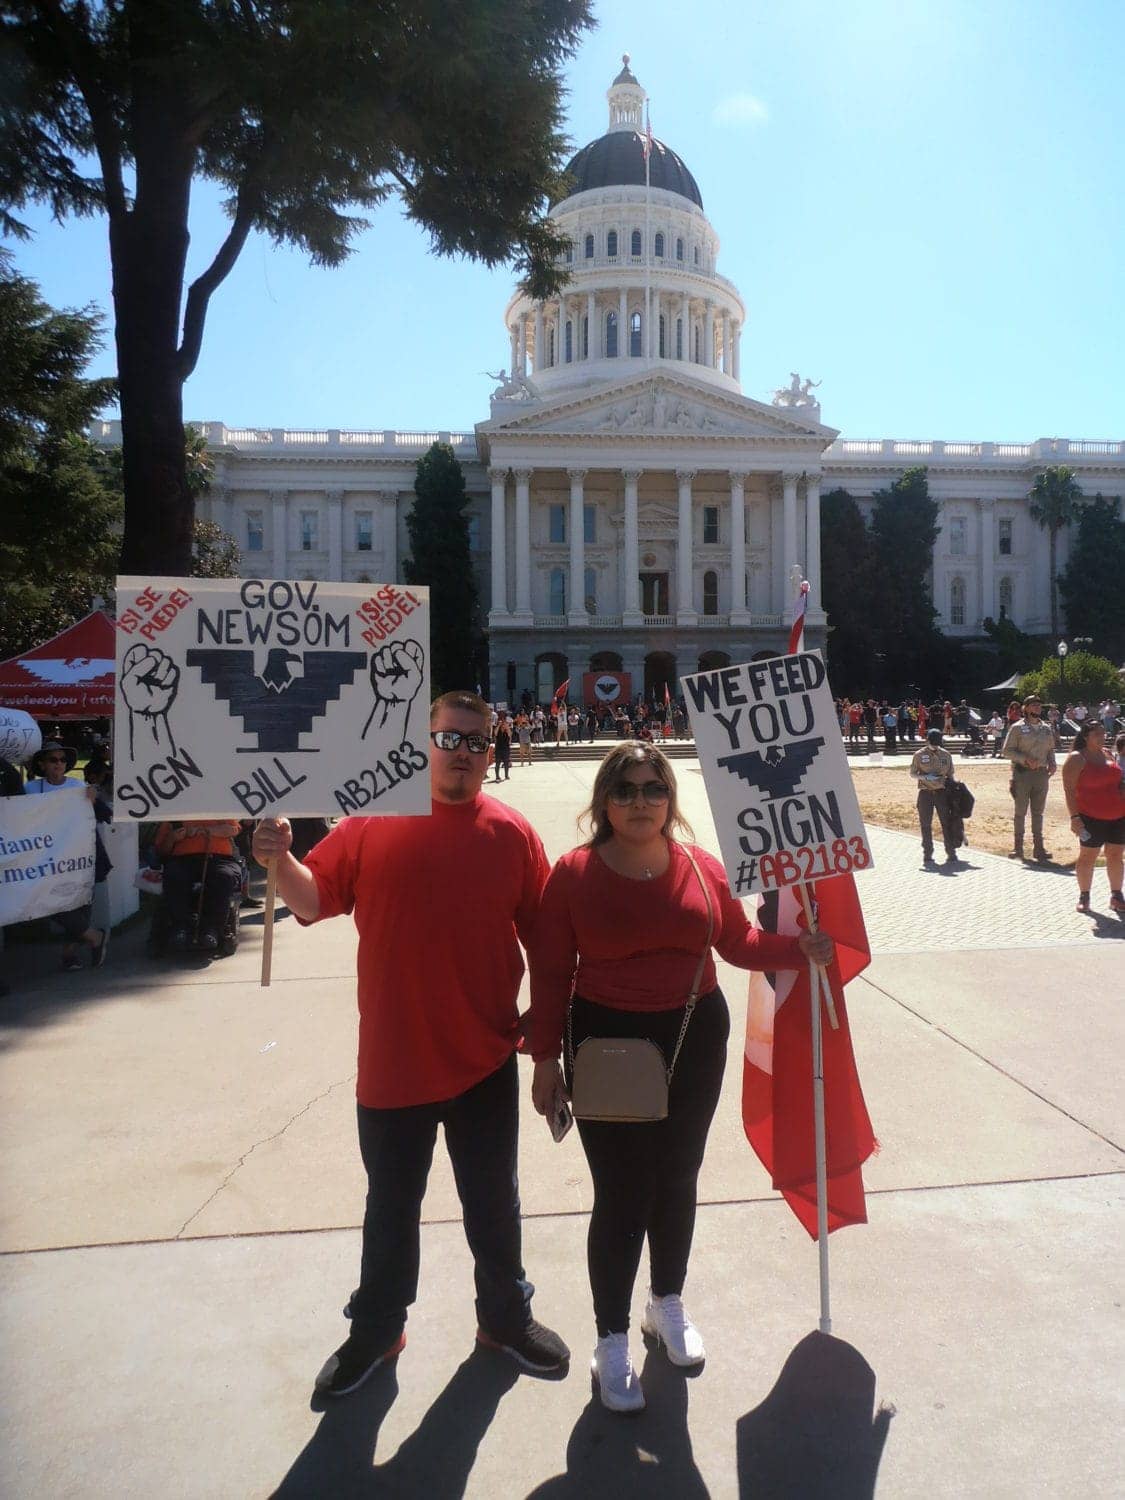 Teamsters-Mark-and-Jessica-from-Modesto-UFW-march-0822, Sign the damn AB 2183 bill, Newsom!, News & Views 